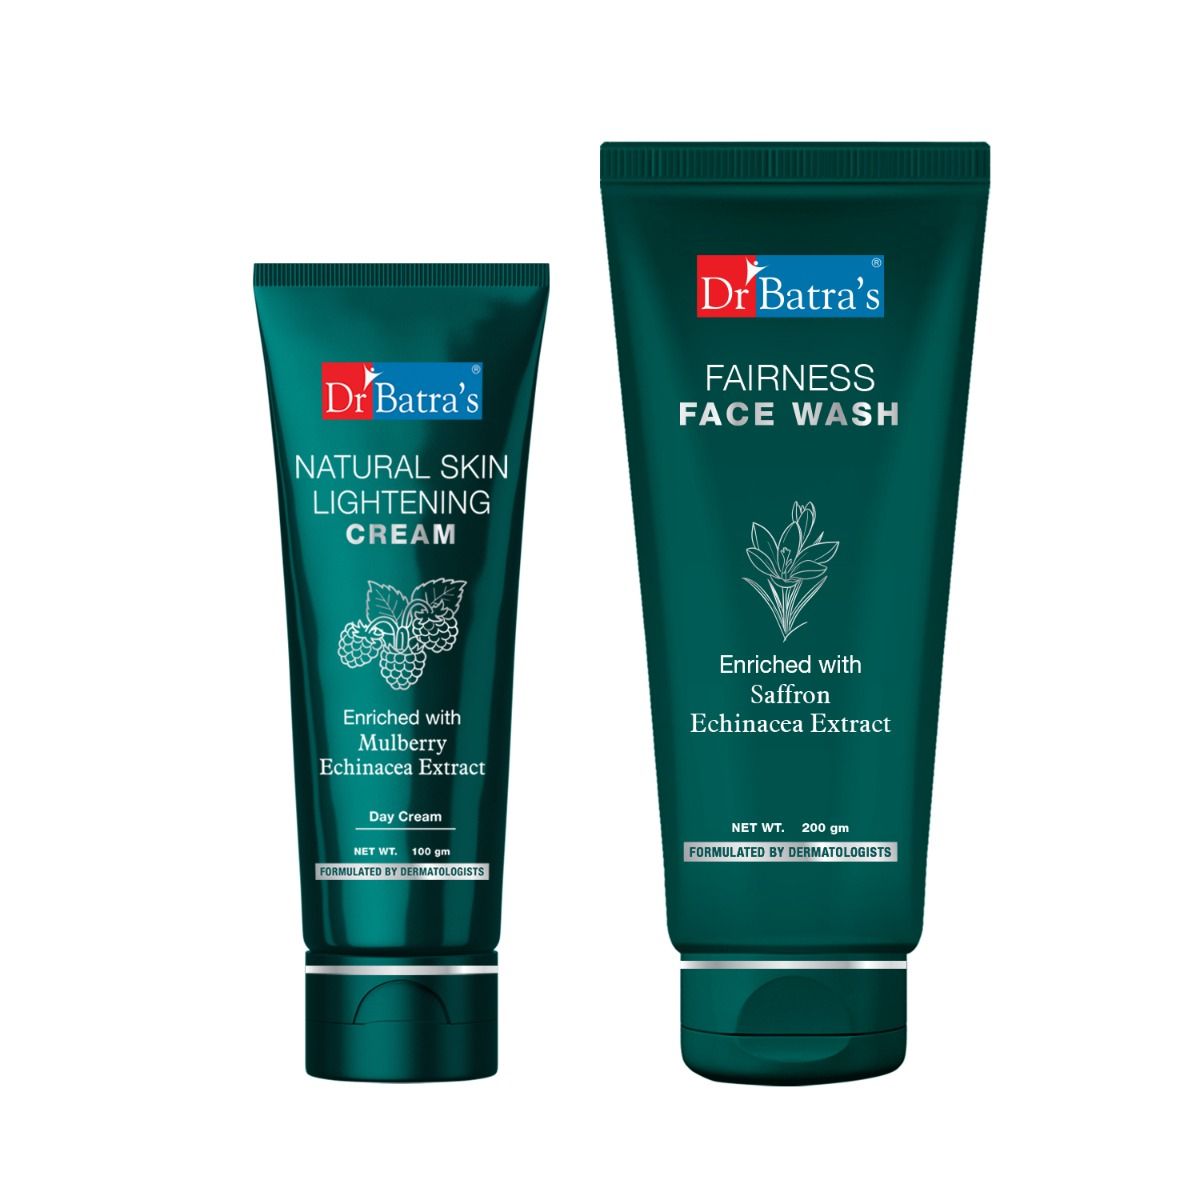     			Dr Batra's Natural Skin Lightening Cream And Fairness Face Wash (Pack Of 2 Men And Women)